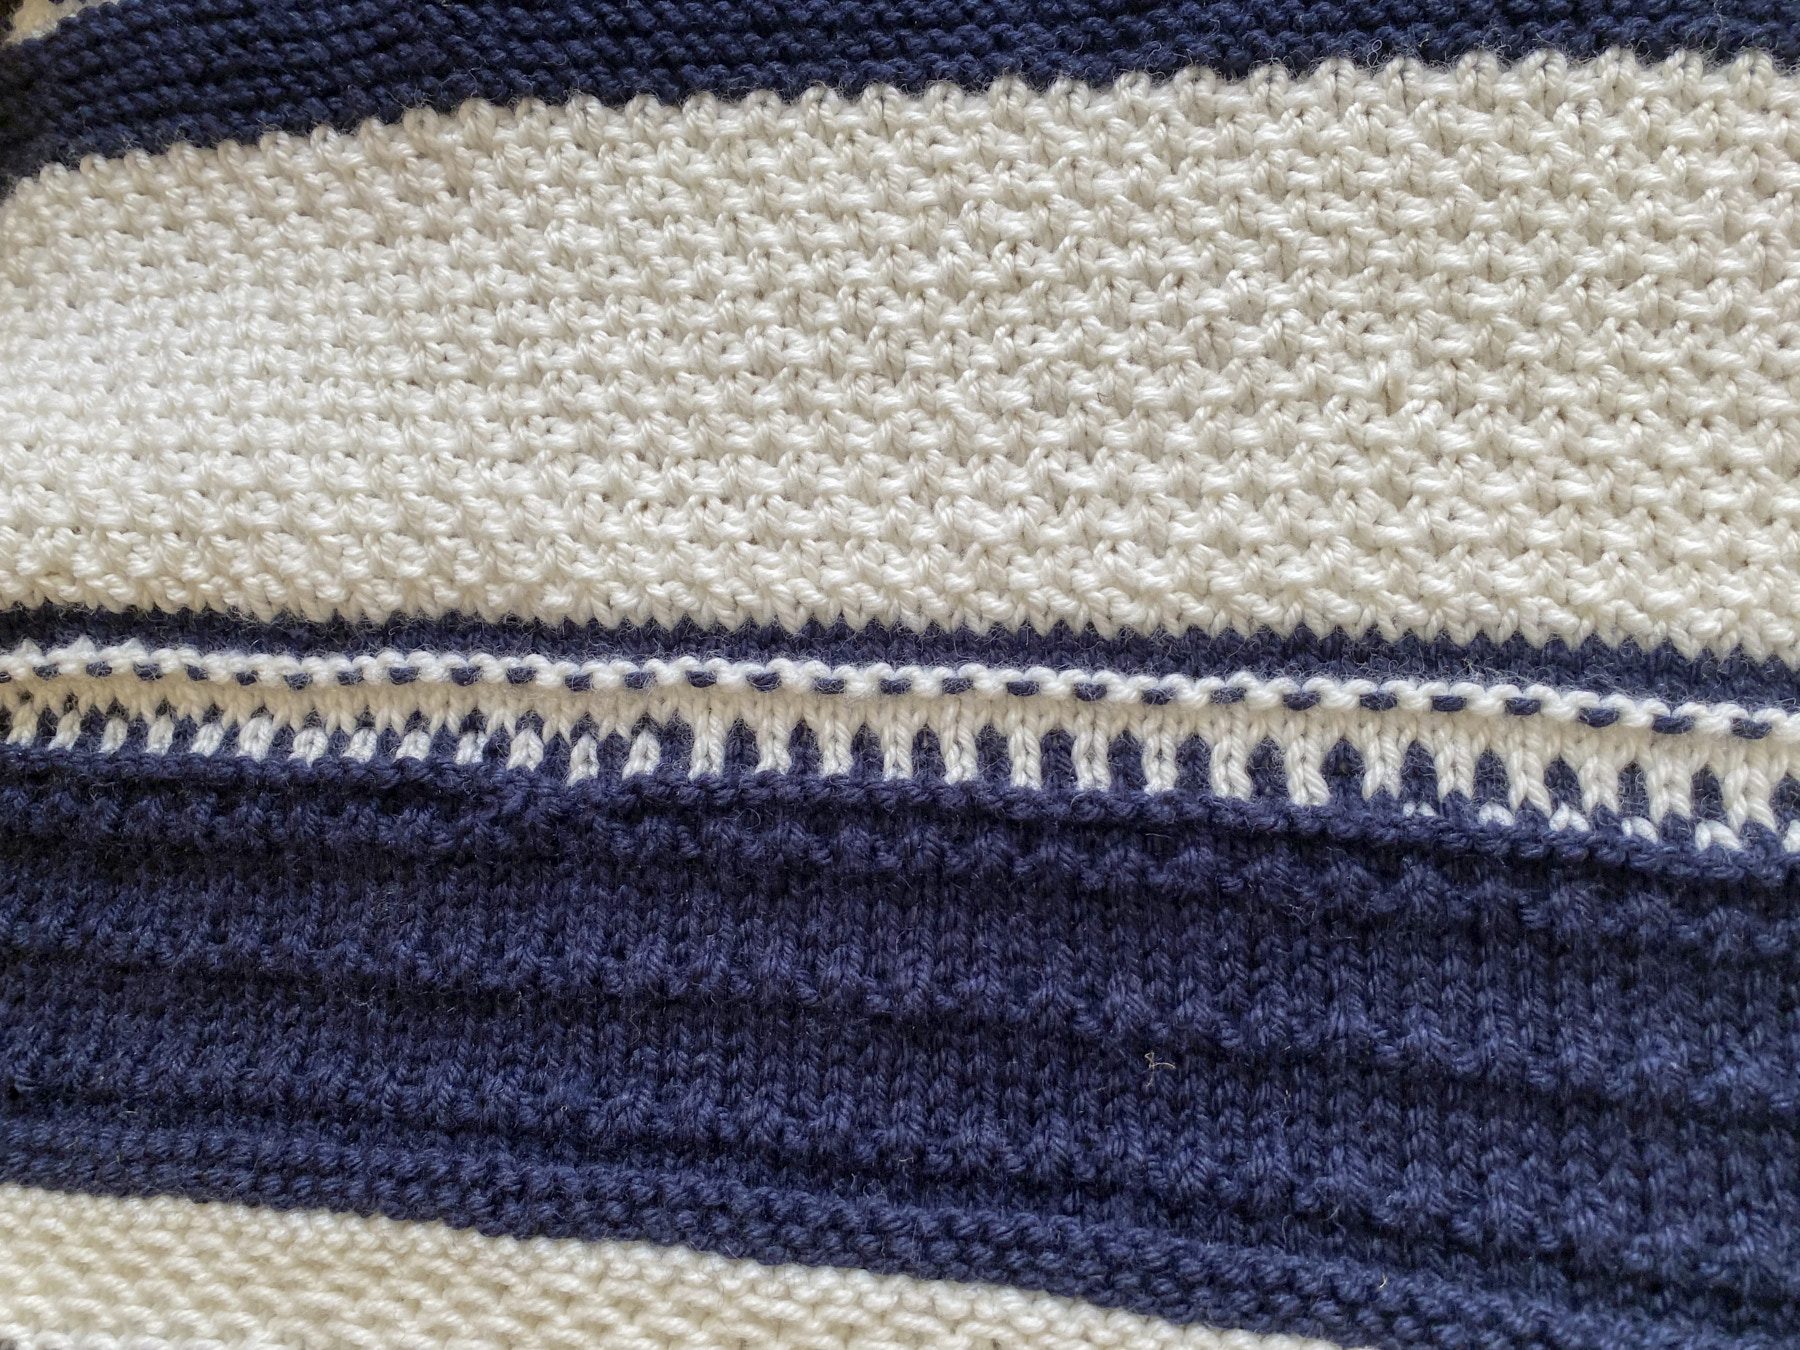 detail of stitches on the improvised blanket